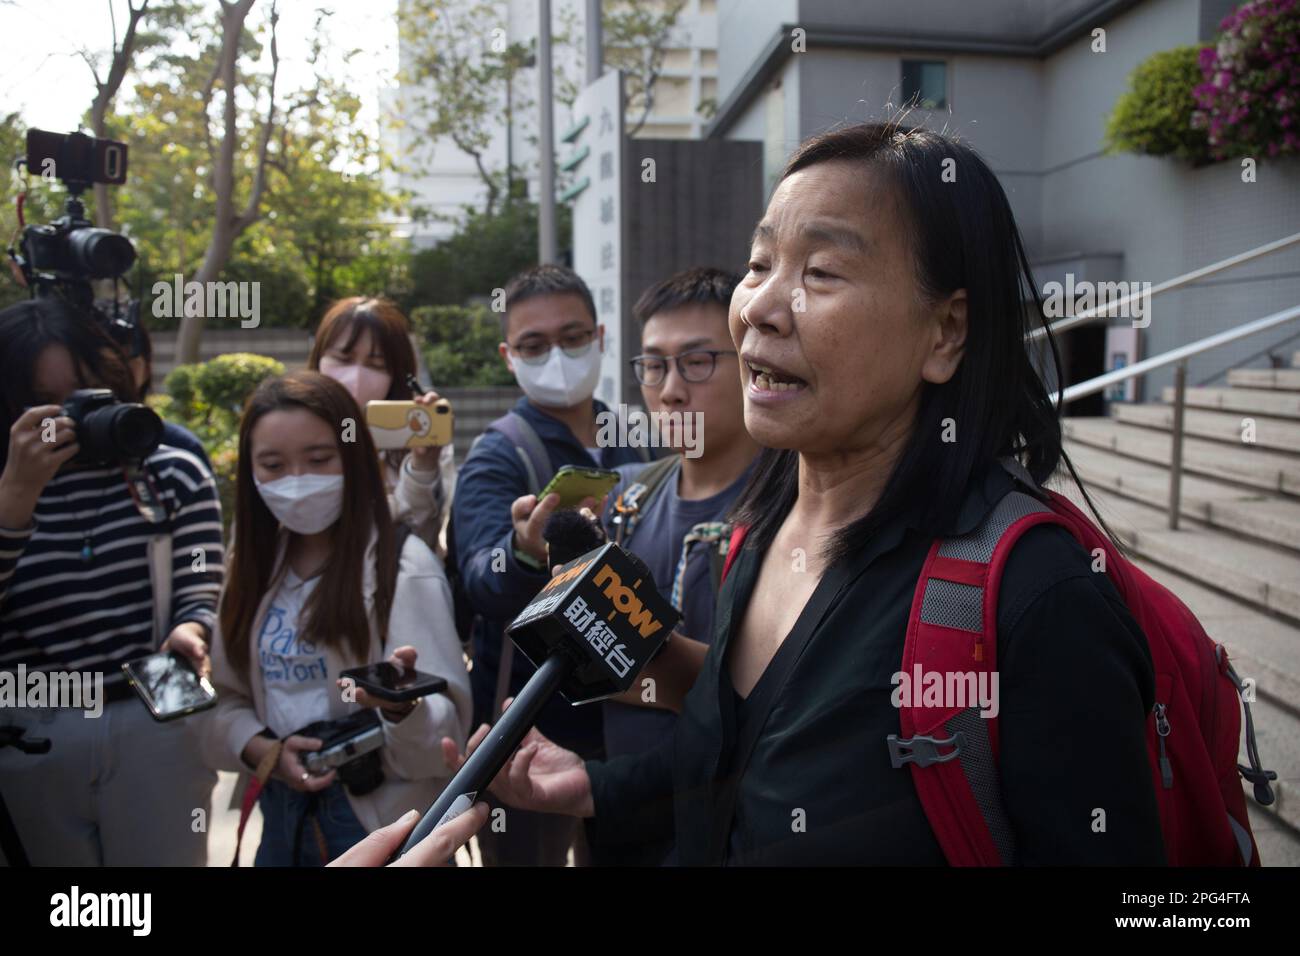 League of Social Democrats chairwoman Chan Po-ying addresses the media outside Kowloon City Court after her conviction of collecting donations without a permit under the Summary Offences Ordinance at Kowloon City Court. Chan and Christina Tang Yuen-ching, a former assistant to ex-lawmaker "Long Hair" Leung Kwok-hung, had set up a street booth on a footbridge on Sai Yee Street to rally public support and urge authorities to "release political prisoners" in Mong Kok on July 24, 2021.  16MAR23 SCMP/ Brian Wong Stock Photo